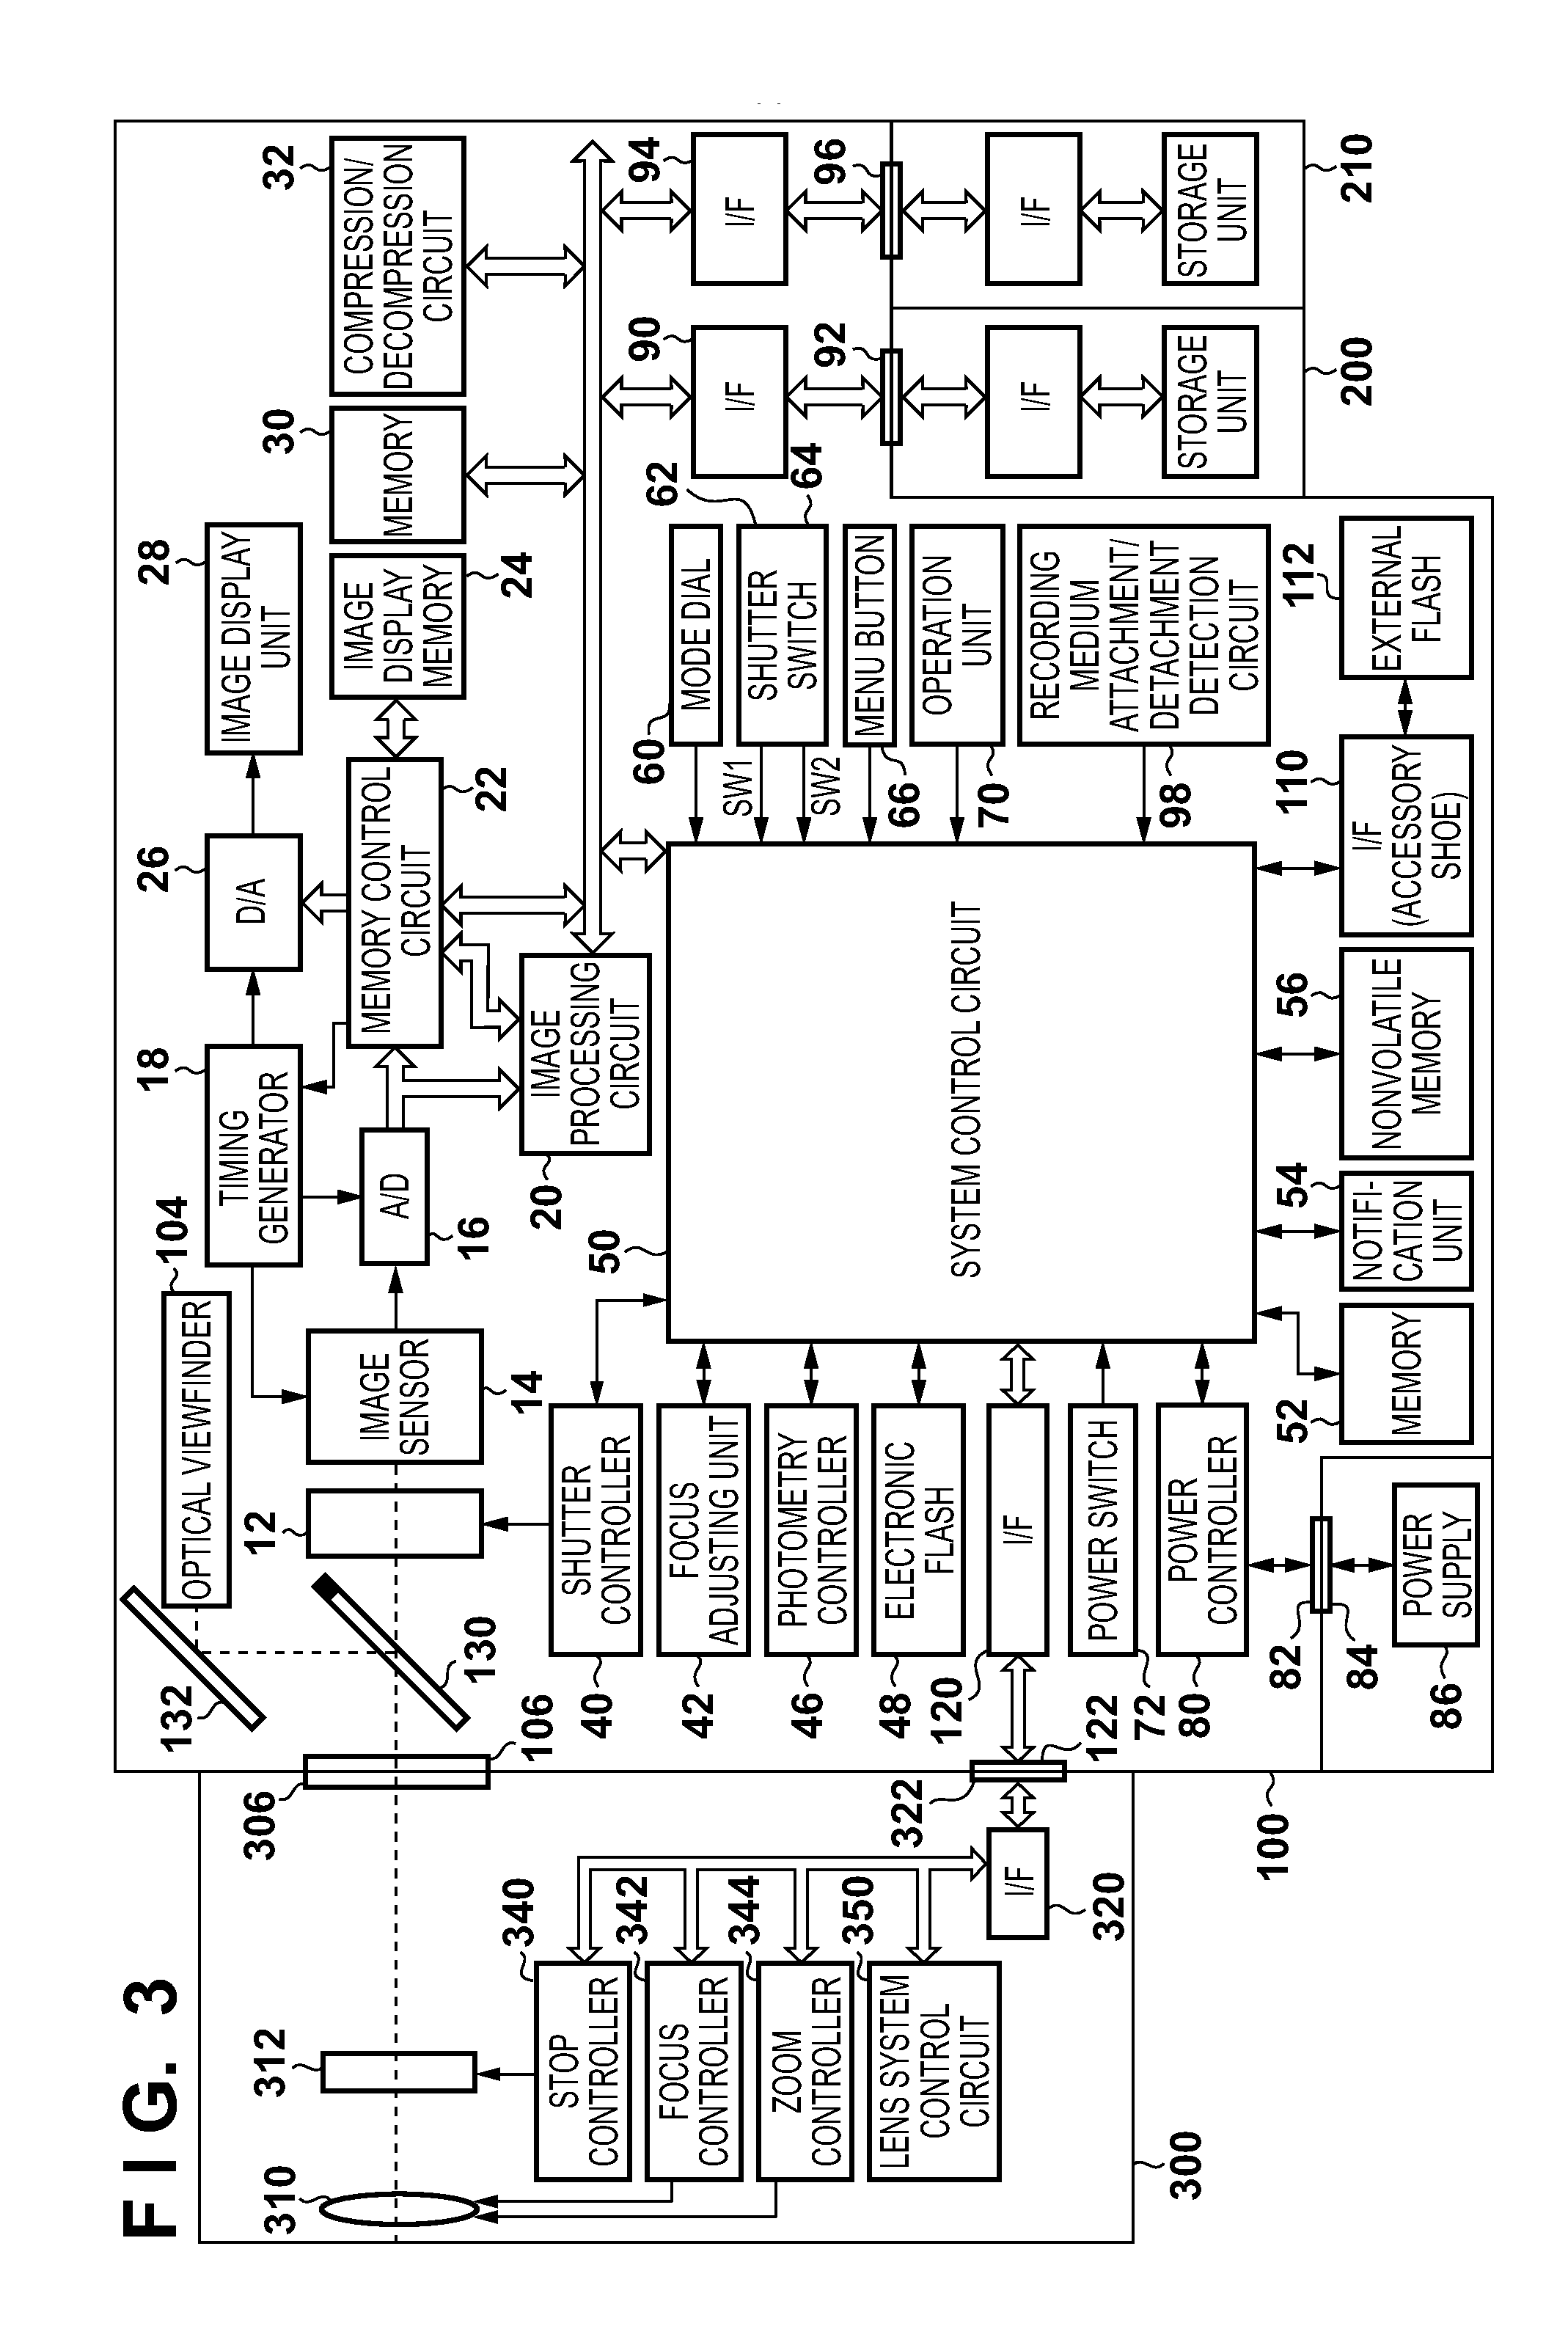 Image capture apparatus and control method thereof